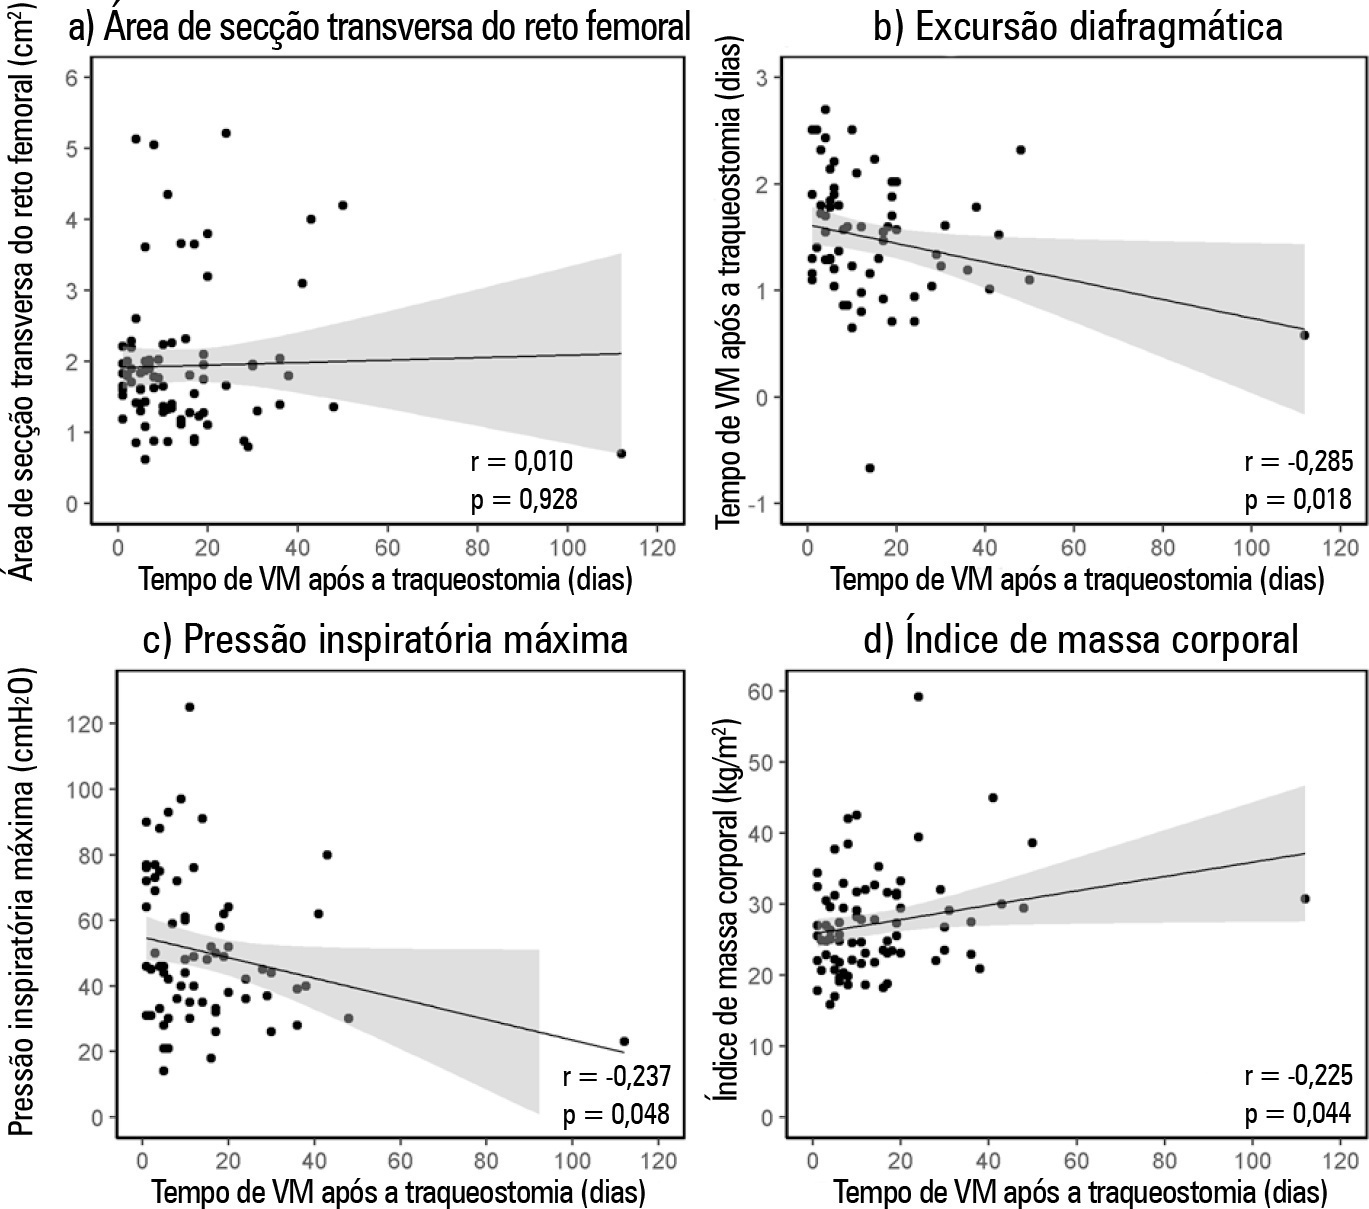 Association between rectus femoris cross-sectional area and diaphragmatic excursion with weaning of tracheostomized patients in the intensive care unit